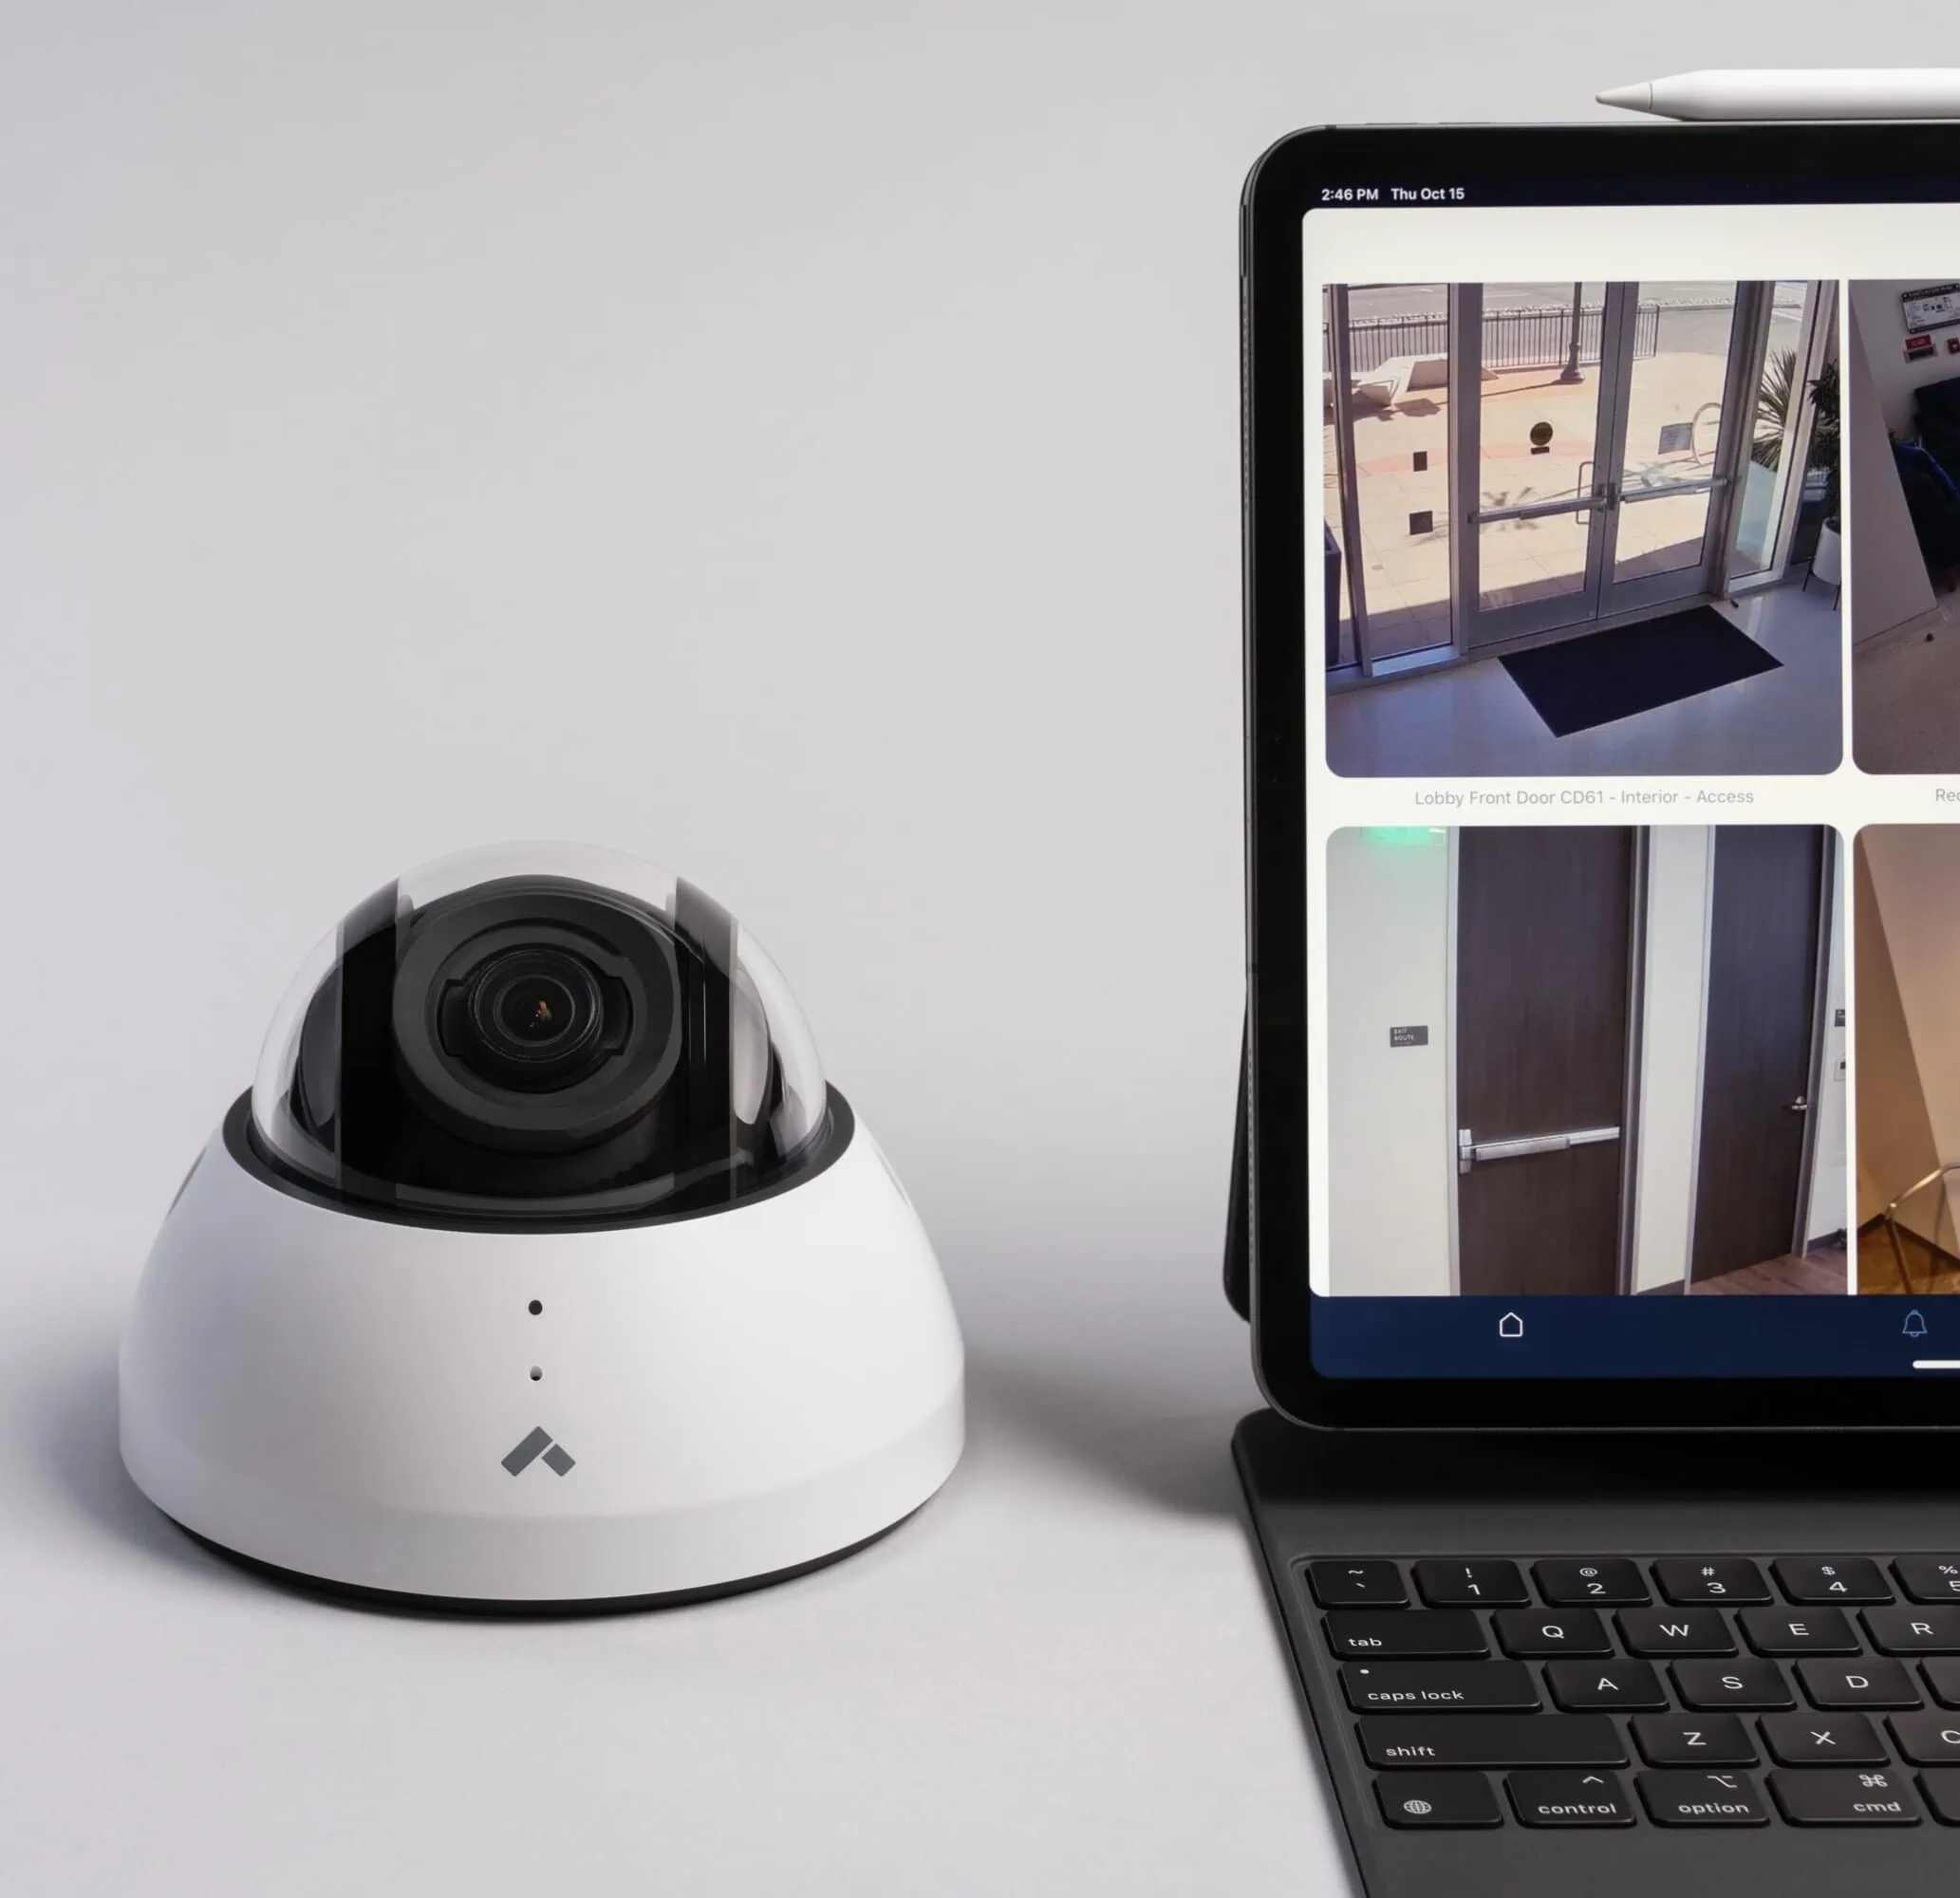 Dome camera next to laptop displaying Verkada security solution services